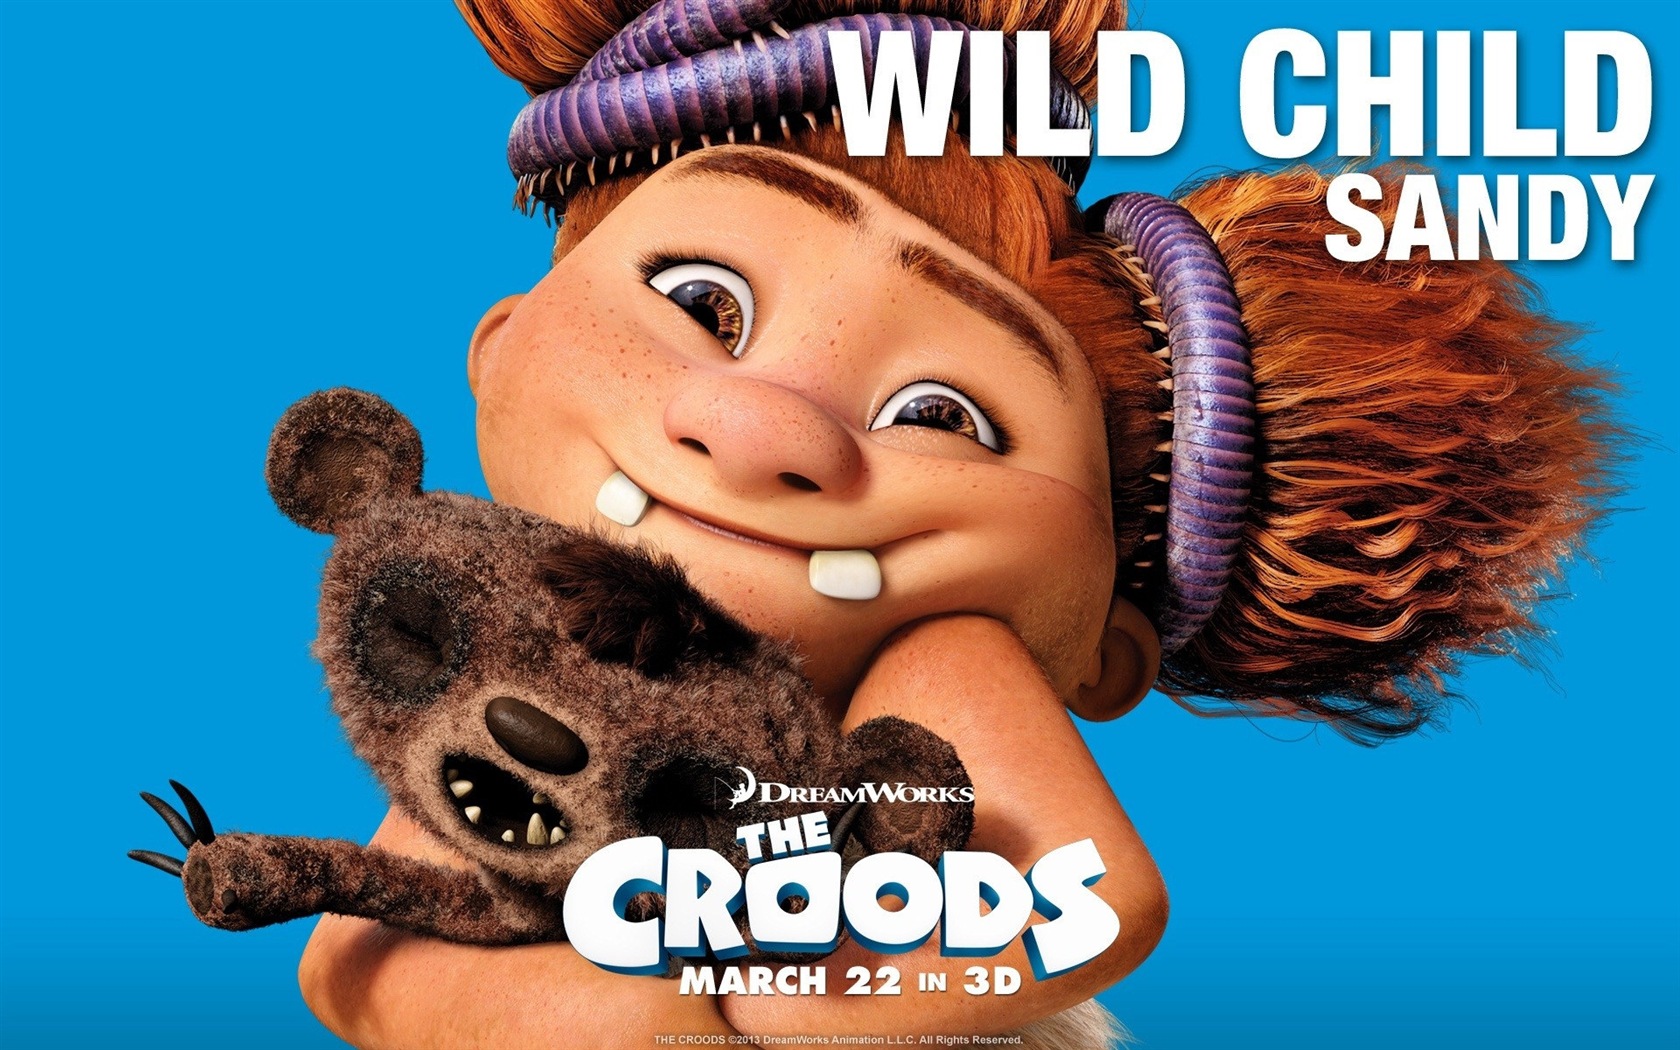 The Croods HD movie wallpapers #9 - 1680x1050